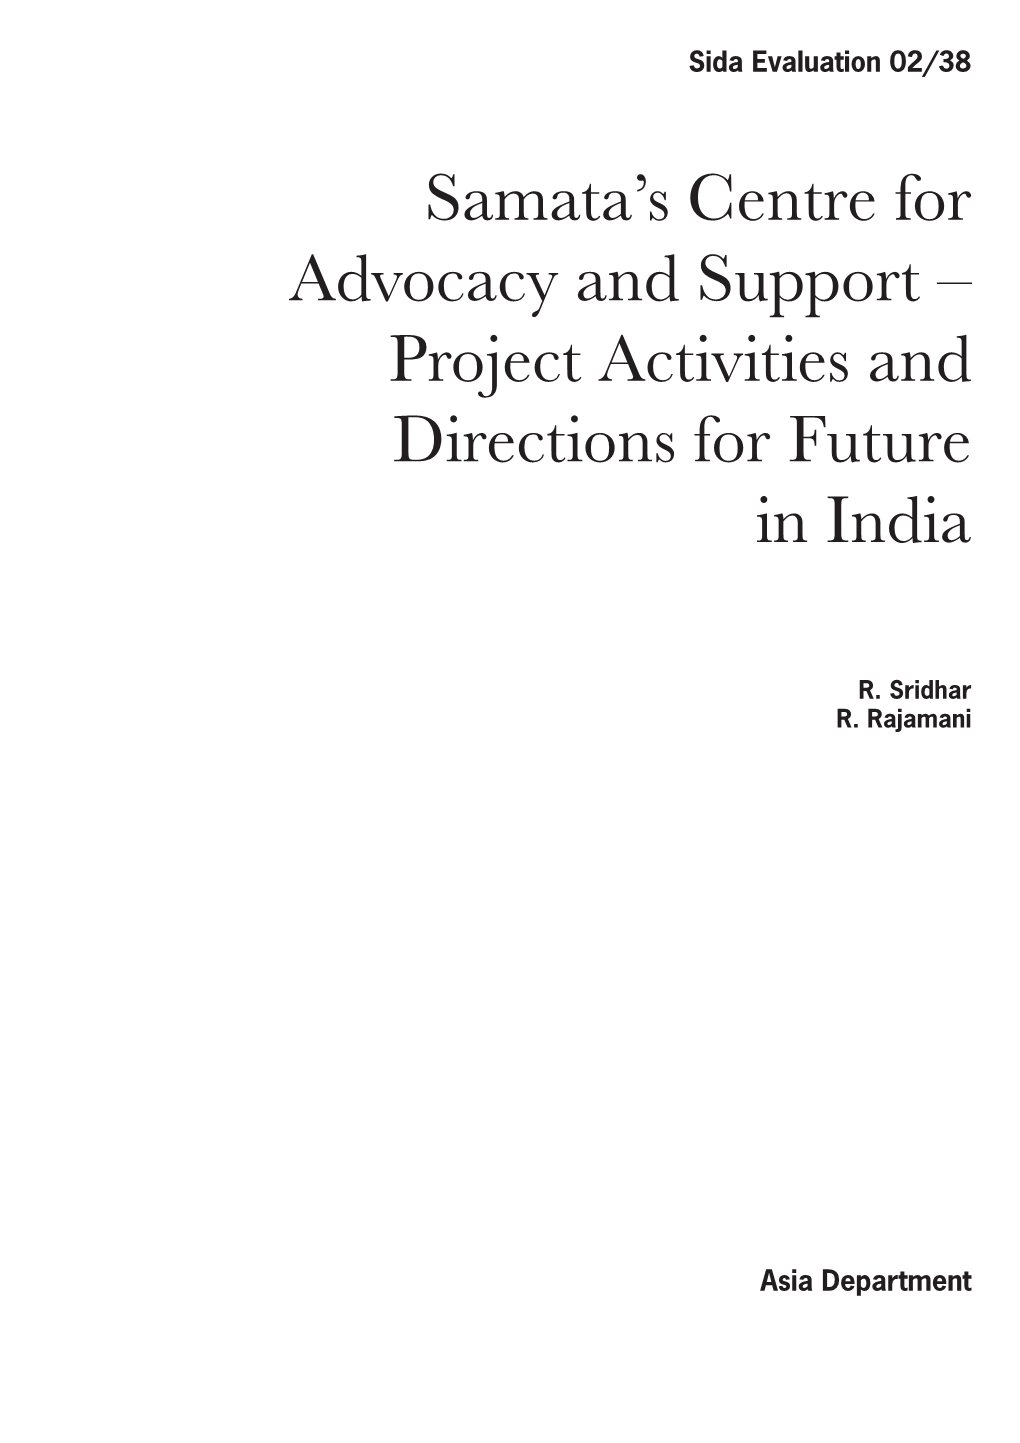 Samata´S Centre for Advocacy and Support Project Activities and Directions for Future in India